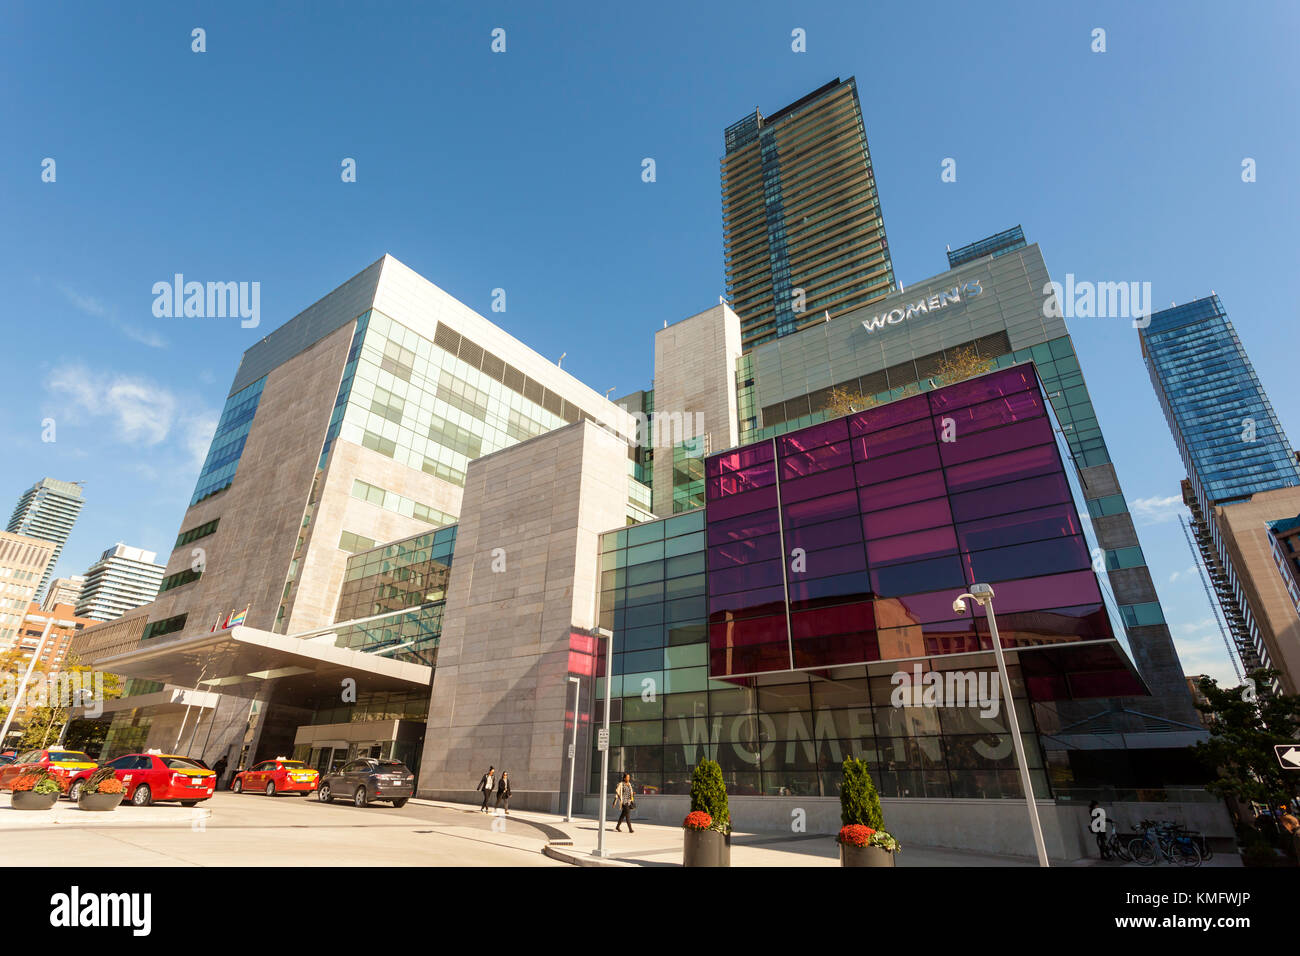 Toronto, Canada - Oct 19, 2017: The Women's College Hospital and medical centre in the city of Toronto. Province of Ontario, Canada Stock Photo